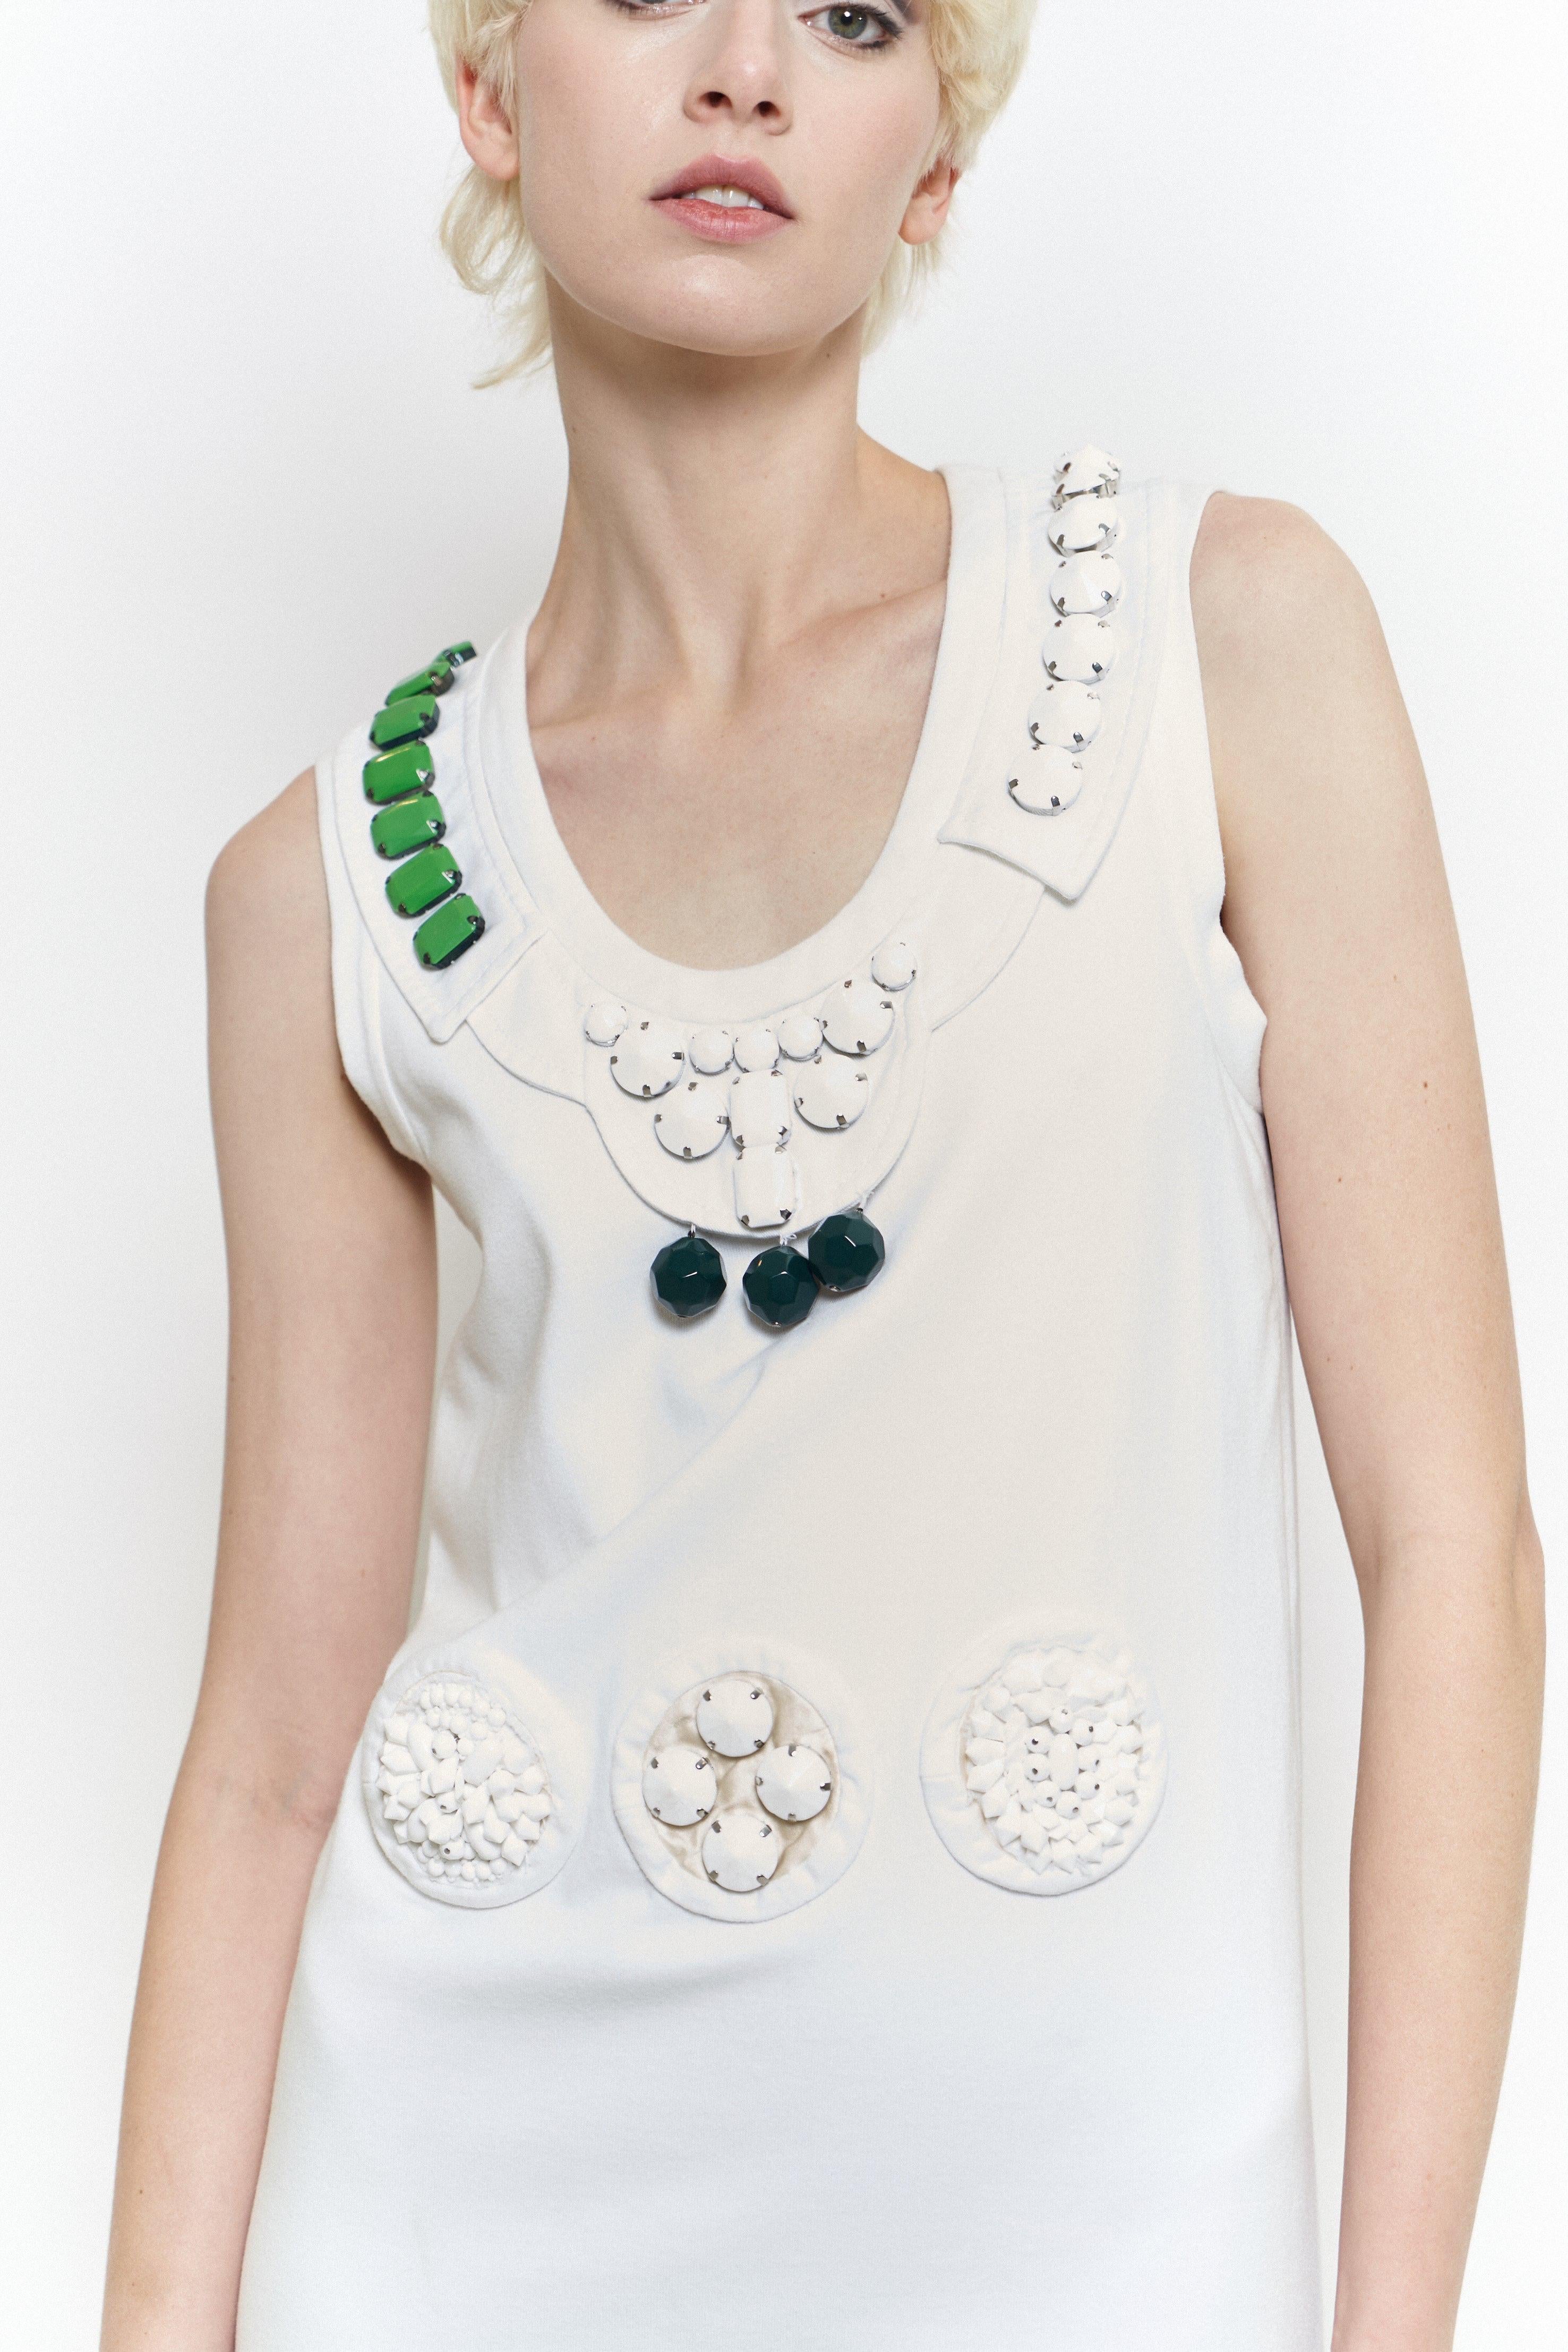 Dating to the S/S 2003 collection, this Prada dress was look 39 on the runway. A shift style crafted from heavy white cotton, this features a scoop neck & is embellished with chunky matte jewels & beads at the neckline, waist & bottom hem. A